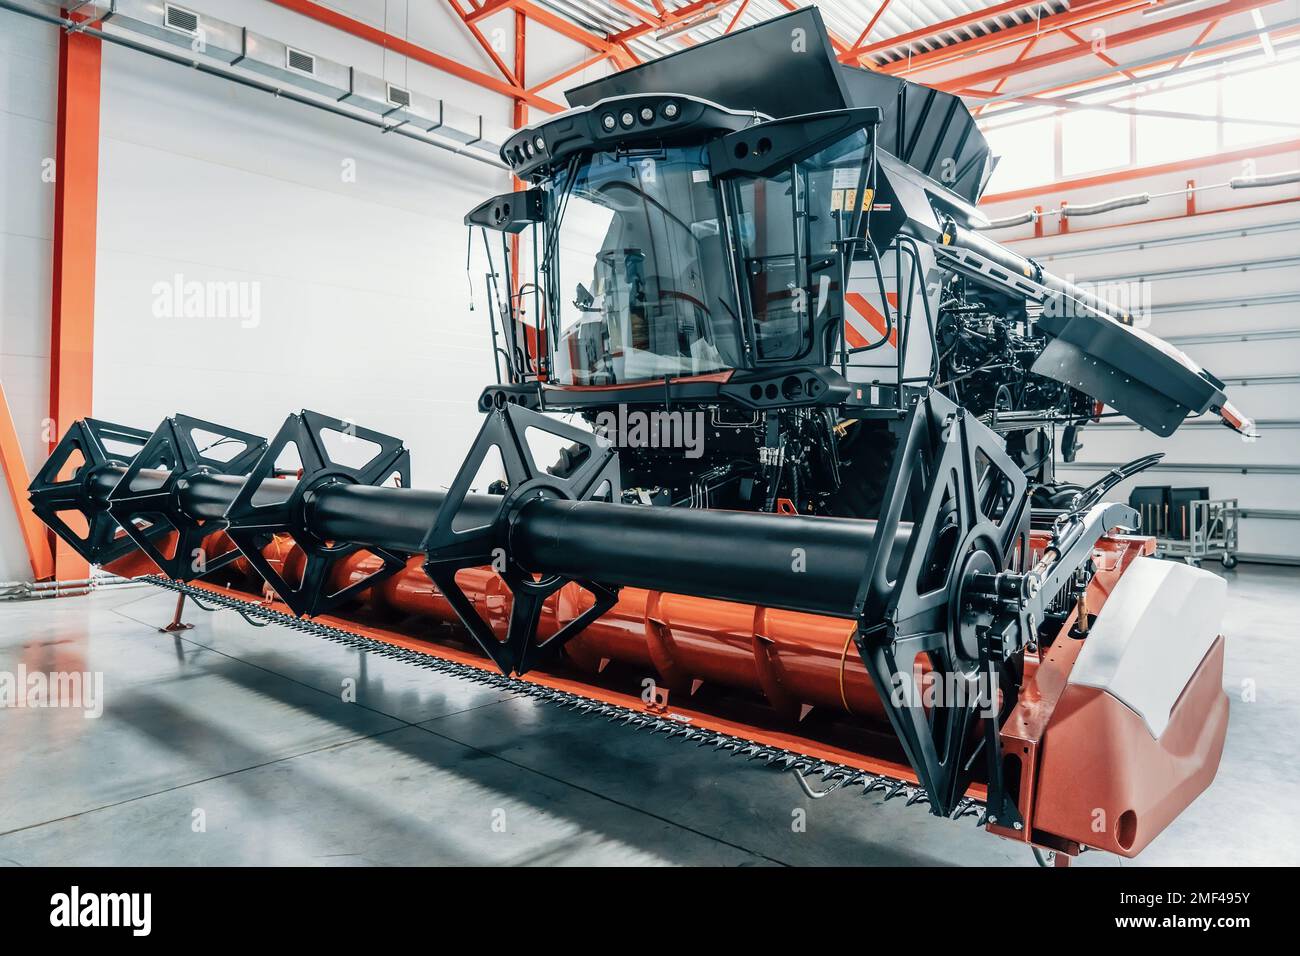 New modern industrial agriculture combine harvester in large garage. Stock Photo